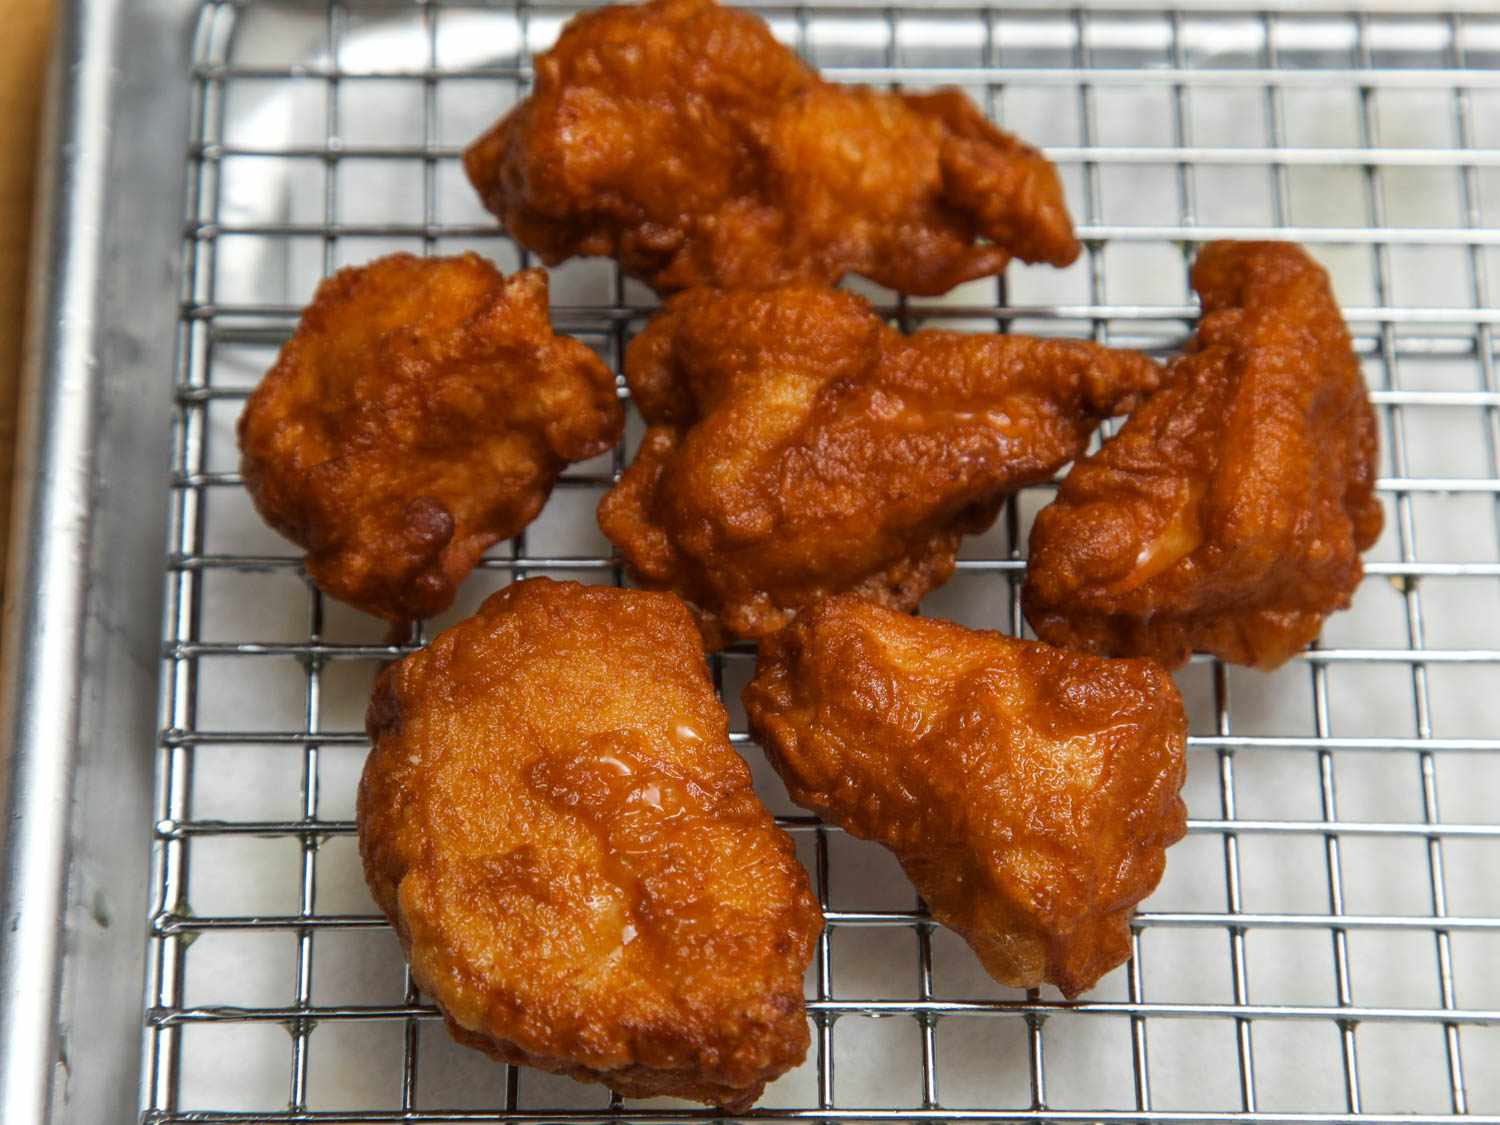 Boneless chicken thighs coated in egg-and-cornstarch batter and fried.